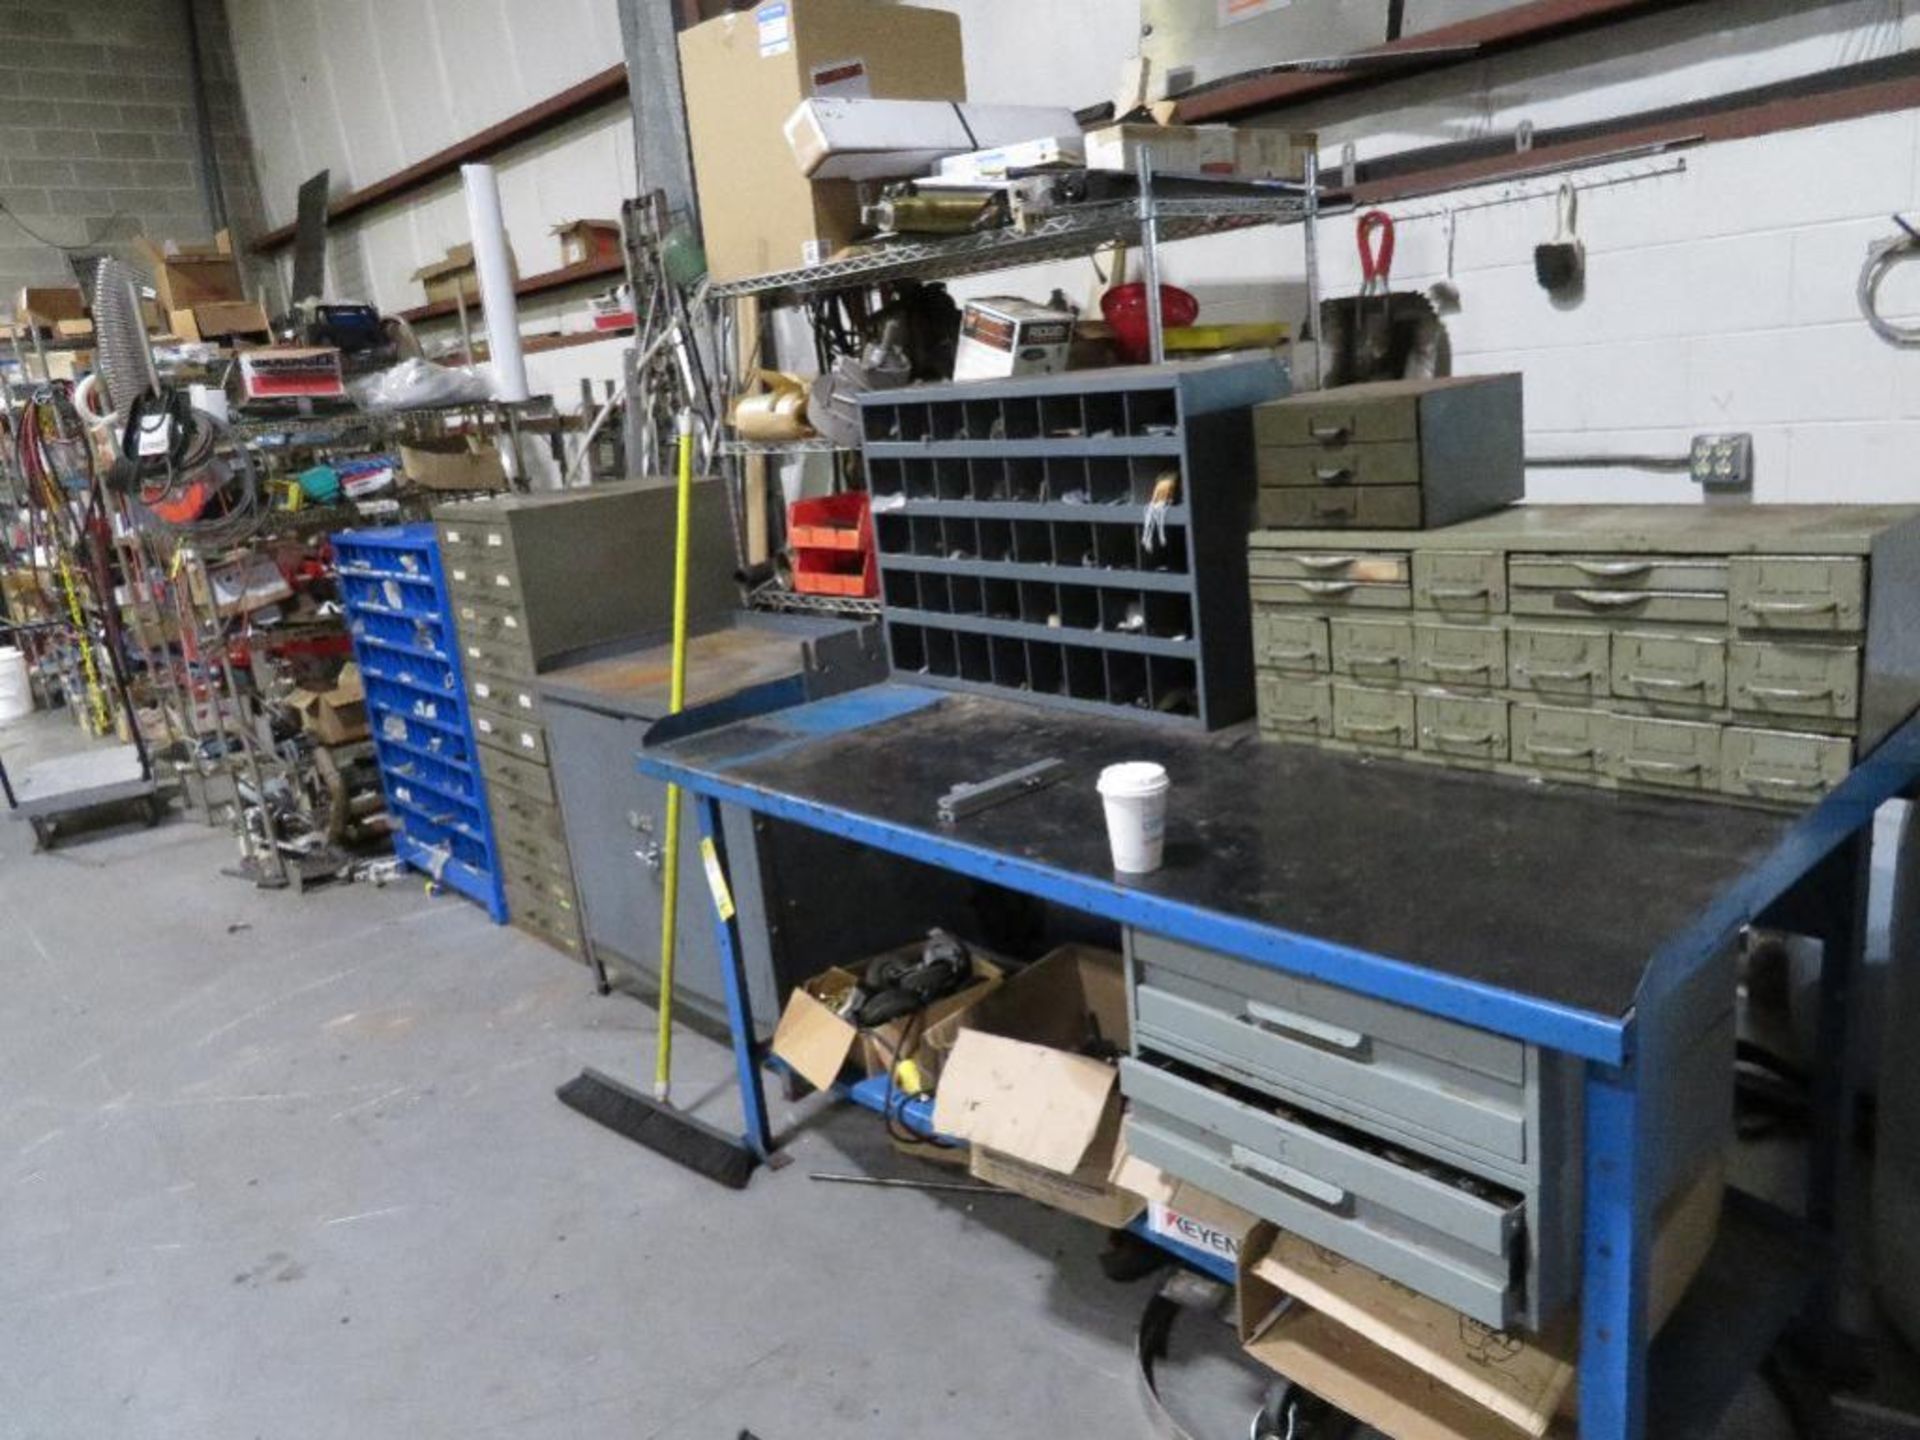 LOT: Steel Work Bench, Cabinets & Shelving Units with Contents of Hardware, Conveyor Parts, Electric